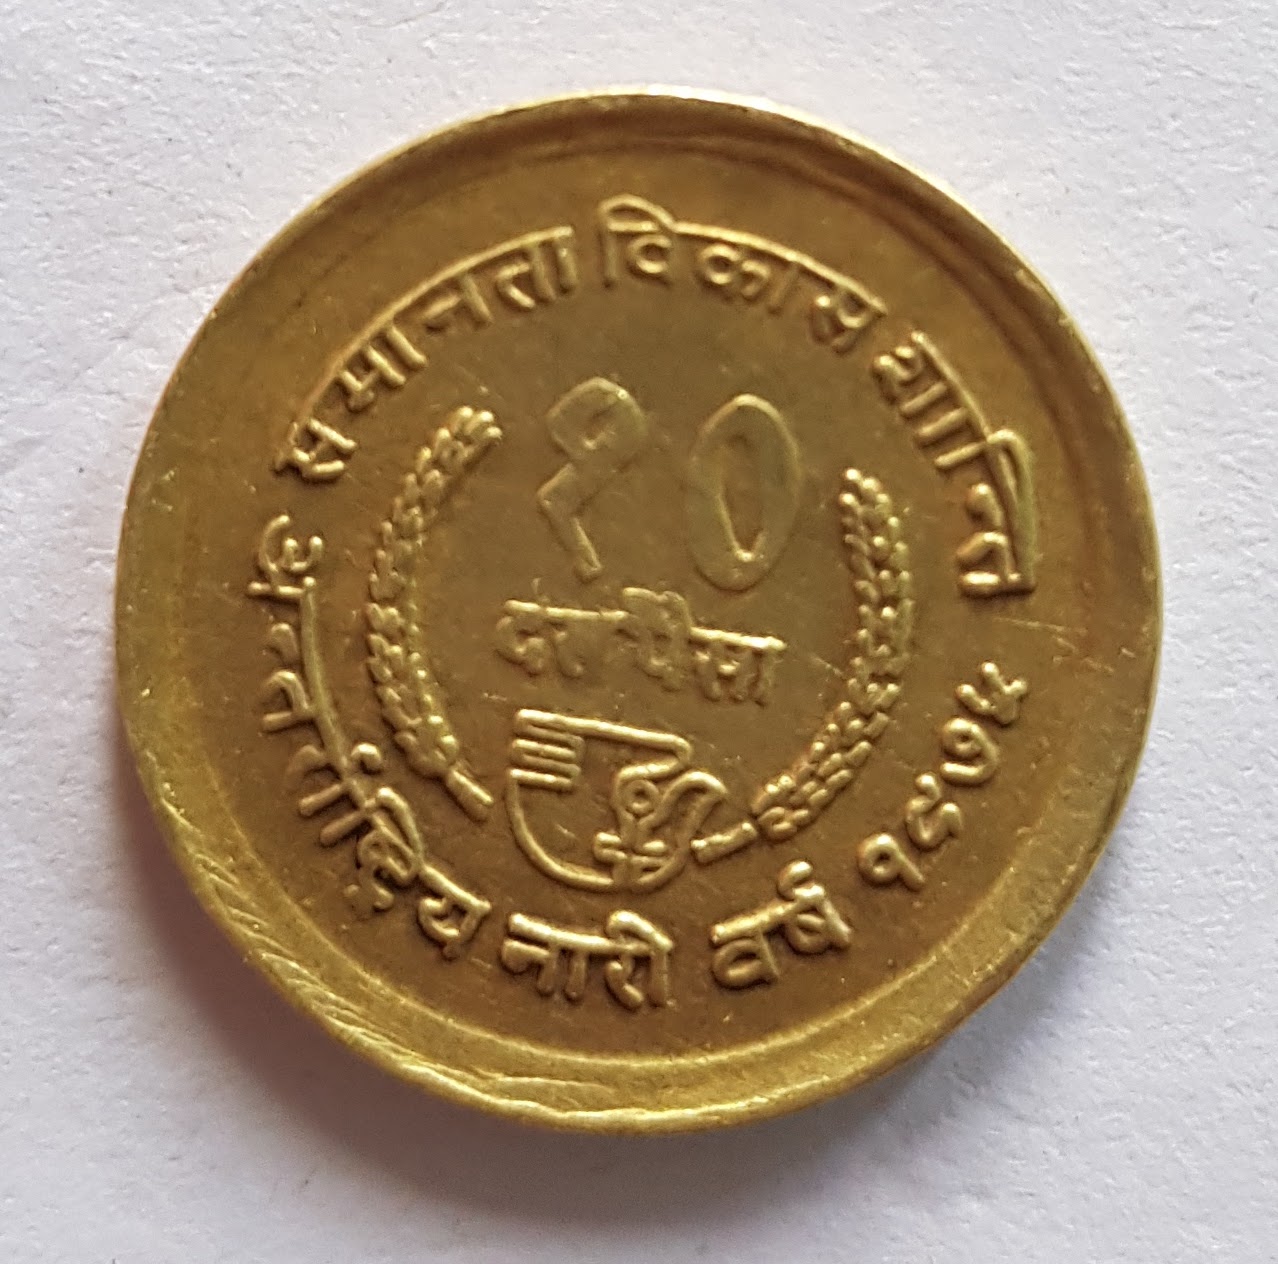 Old Nepali Coins with Historic Importance